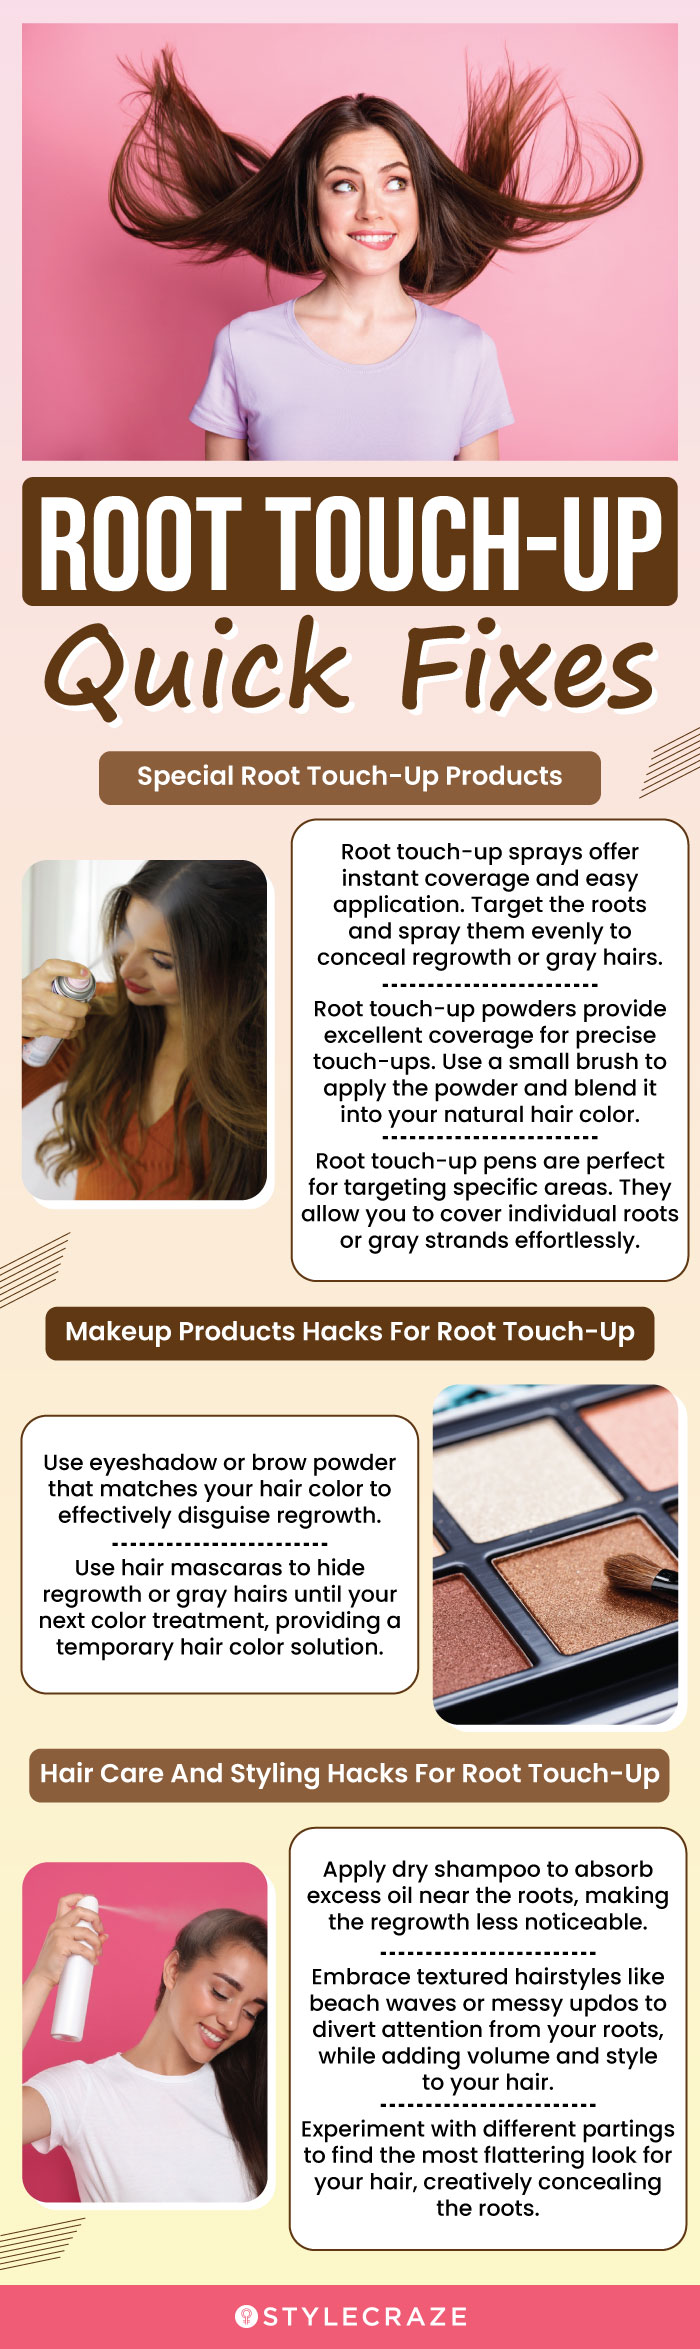 Root Touch-Up Quick Fixes (infographic)